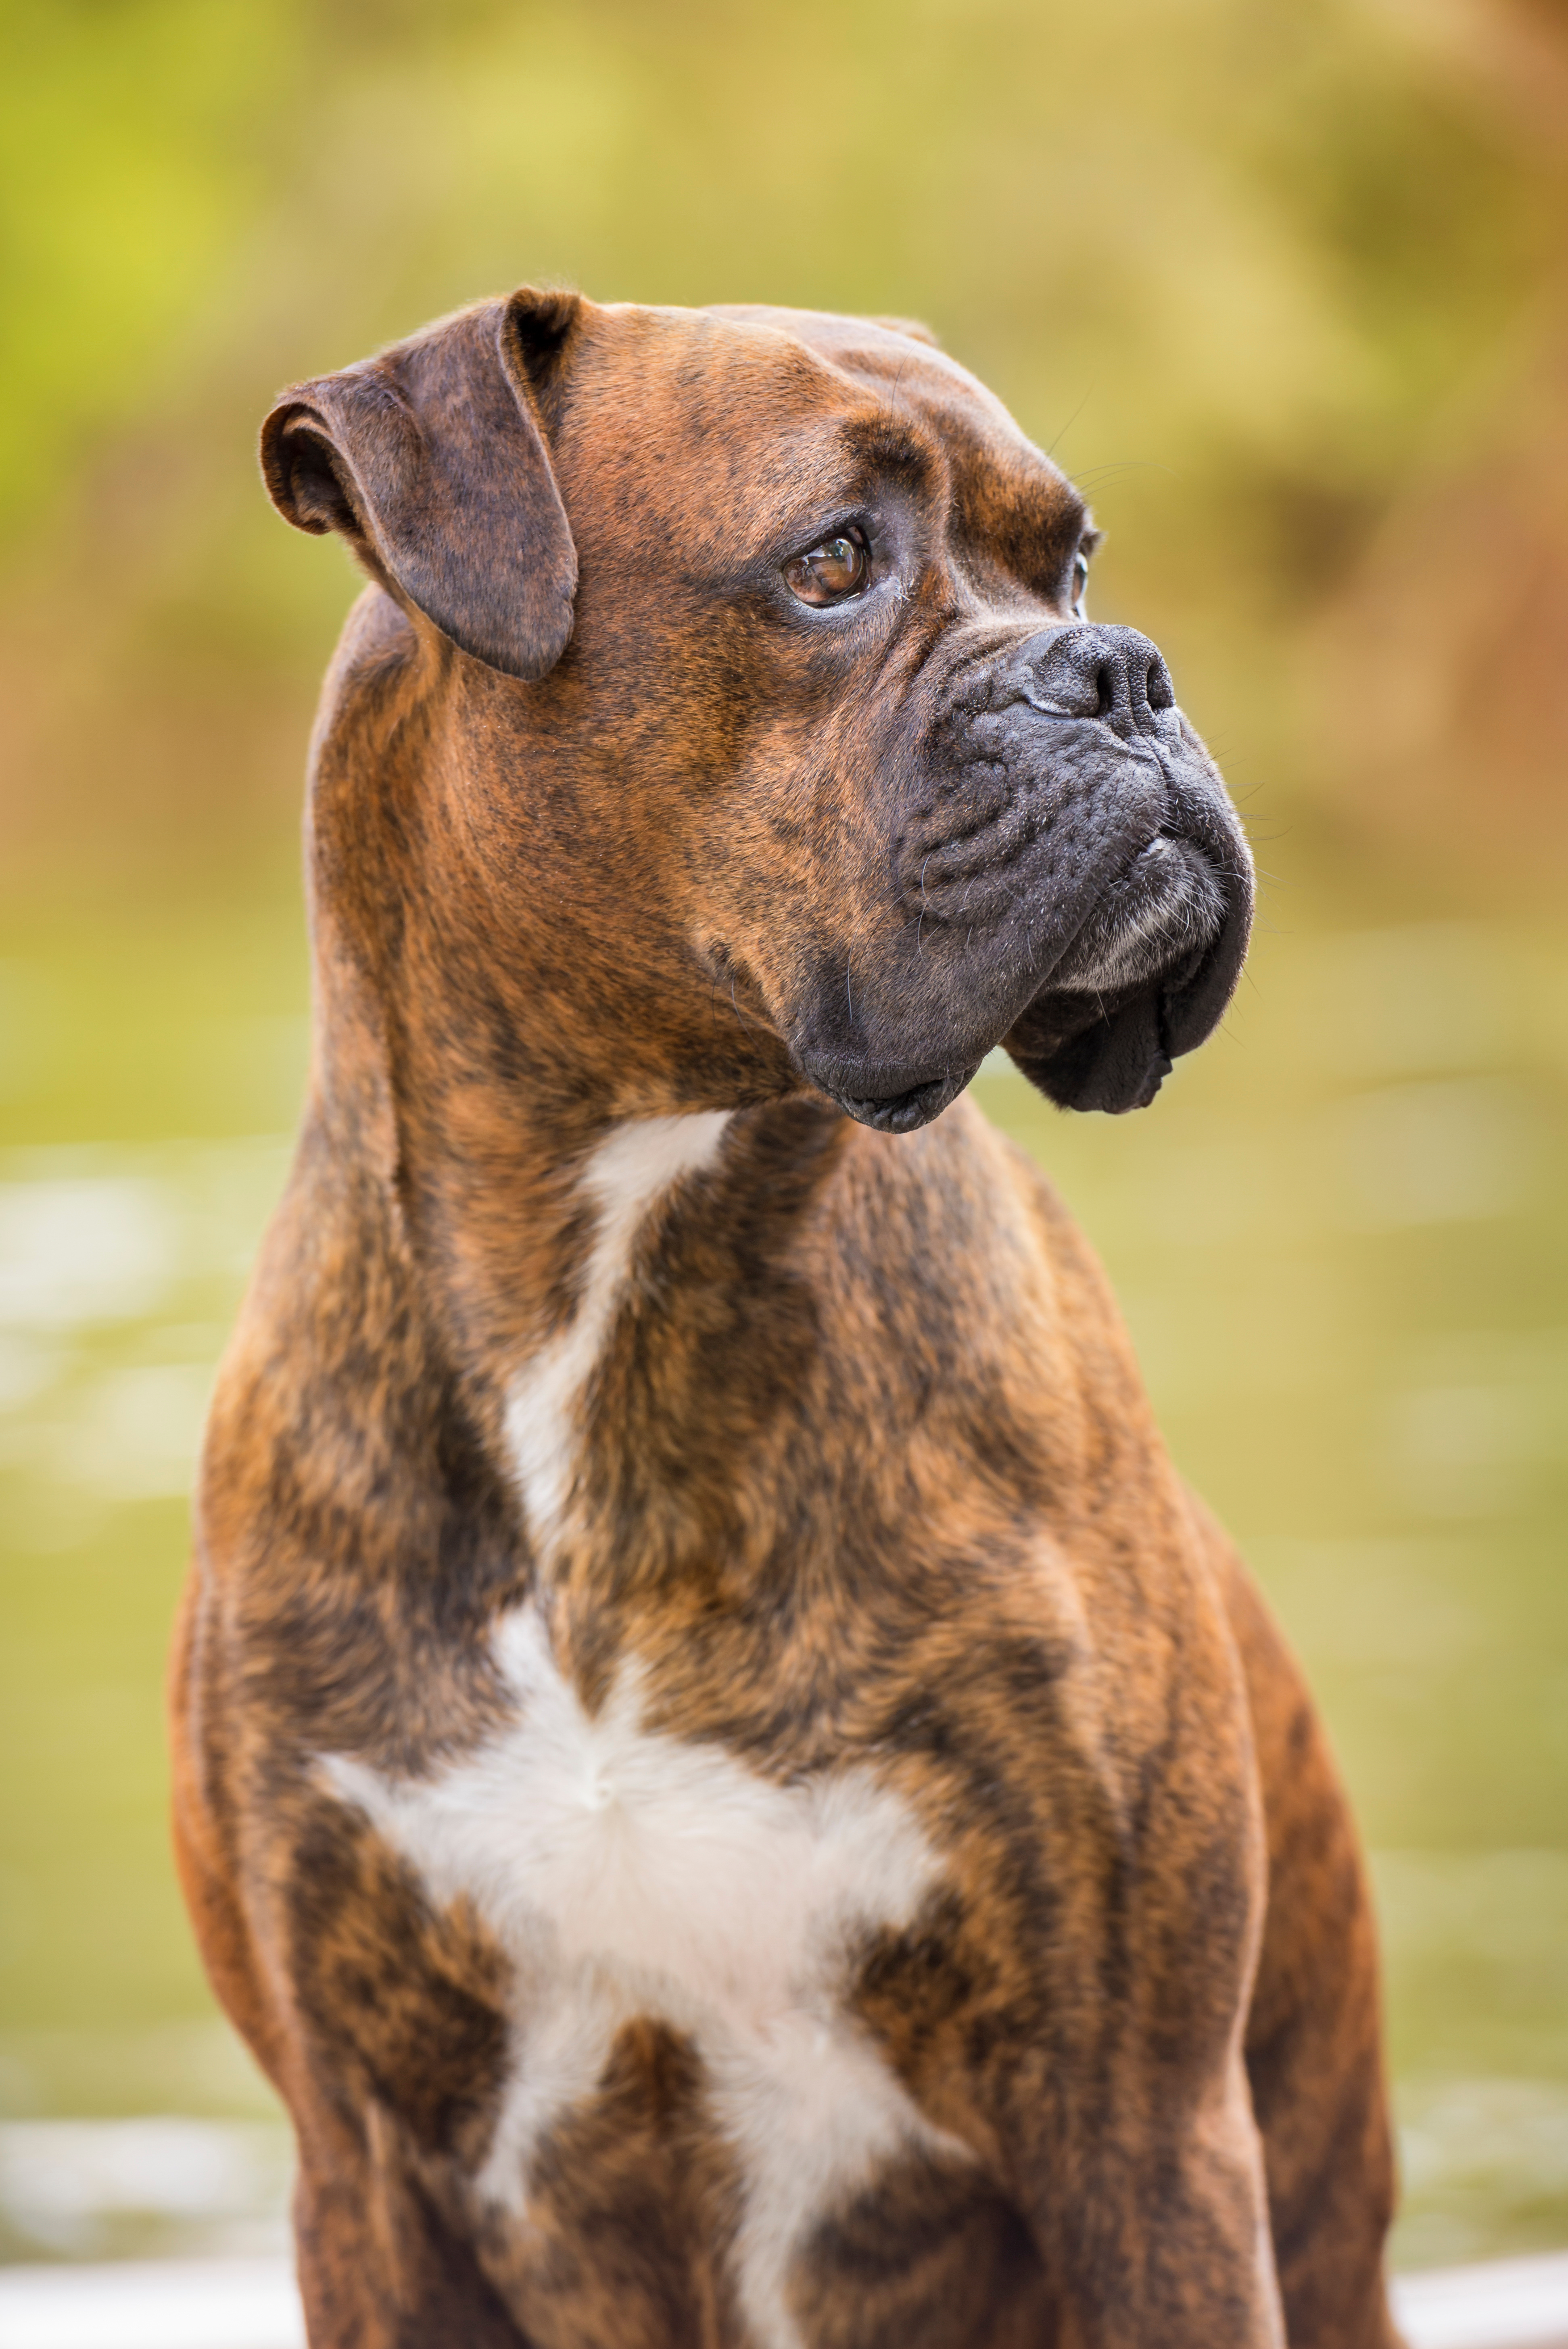 A trained boxer dog - Dog Training Elite West ﻿Houston is the best choice for boxer dog training in The Woodlands, TX!